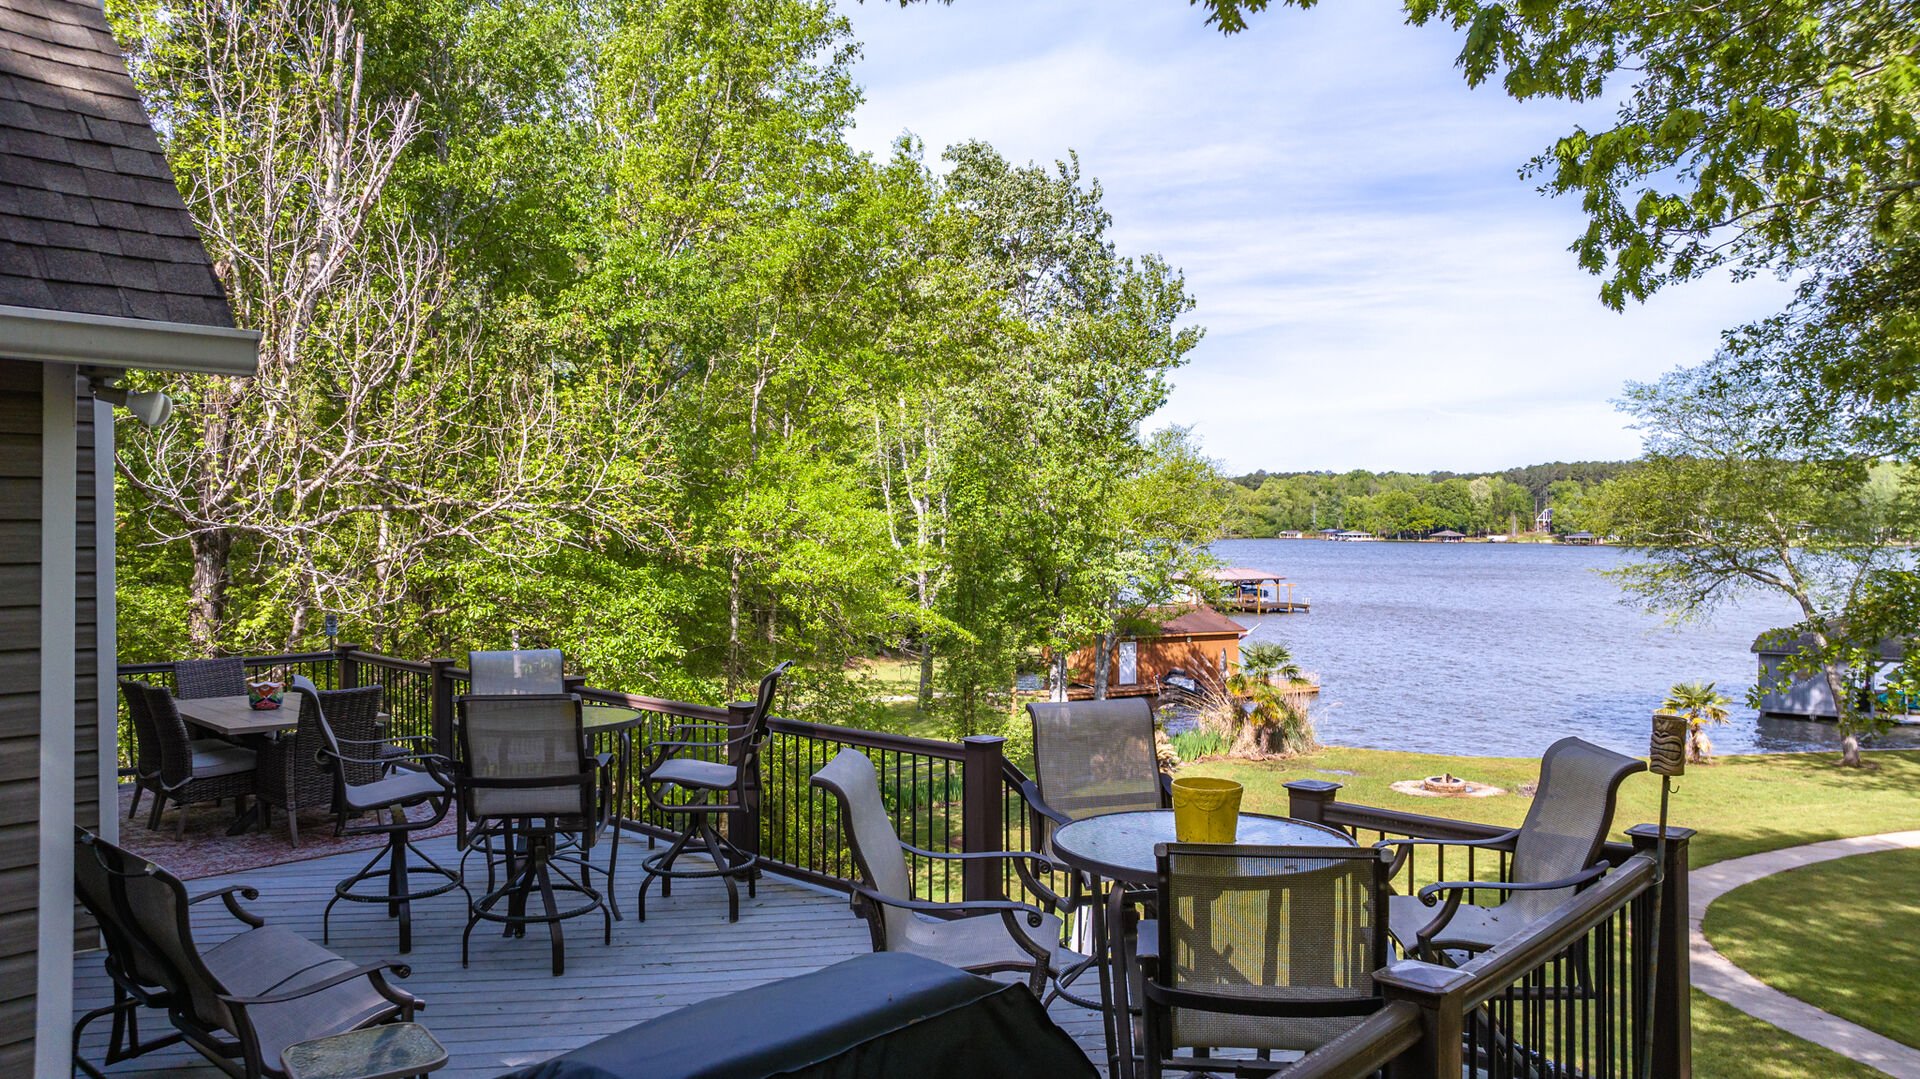 Beautiful Lake View from the Back Deck w/ Plenty of Seating for Everyone!